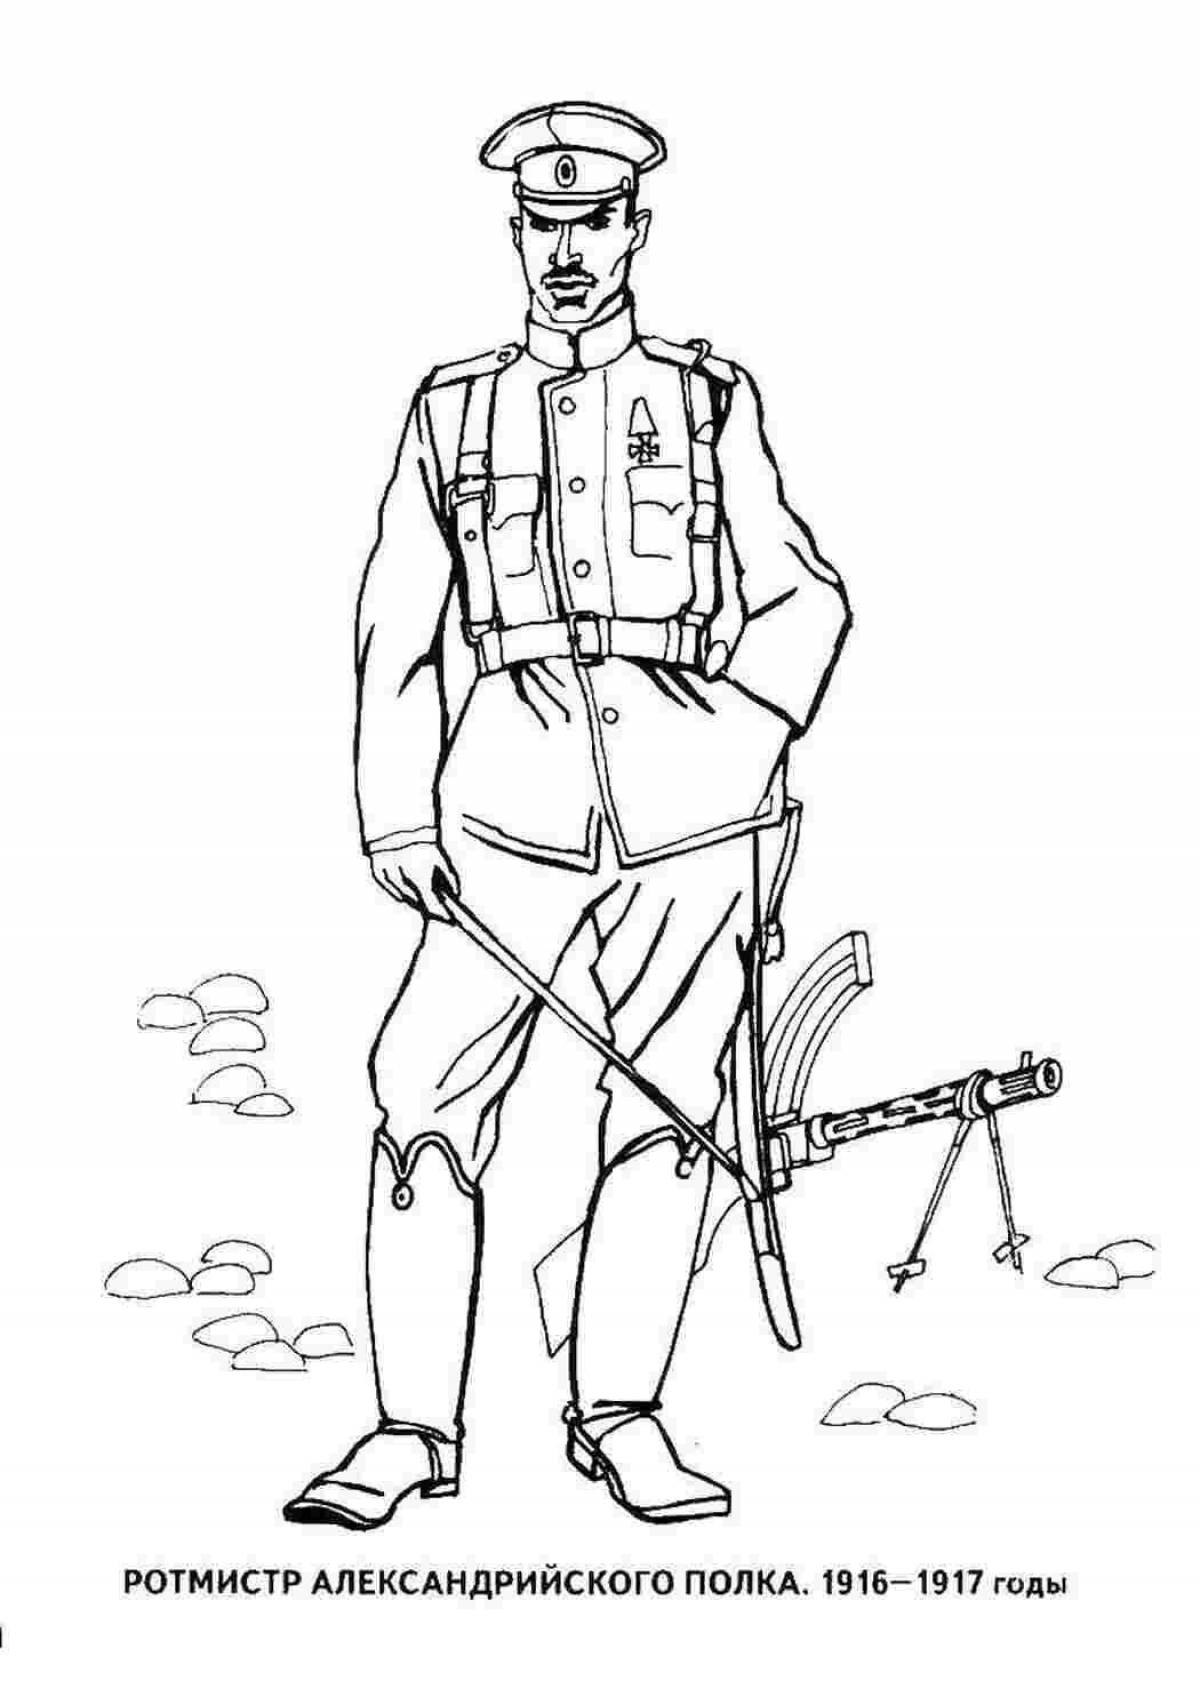 Amazing coloring pages soldiers of different branches of the military for children